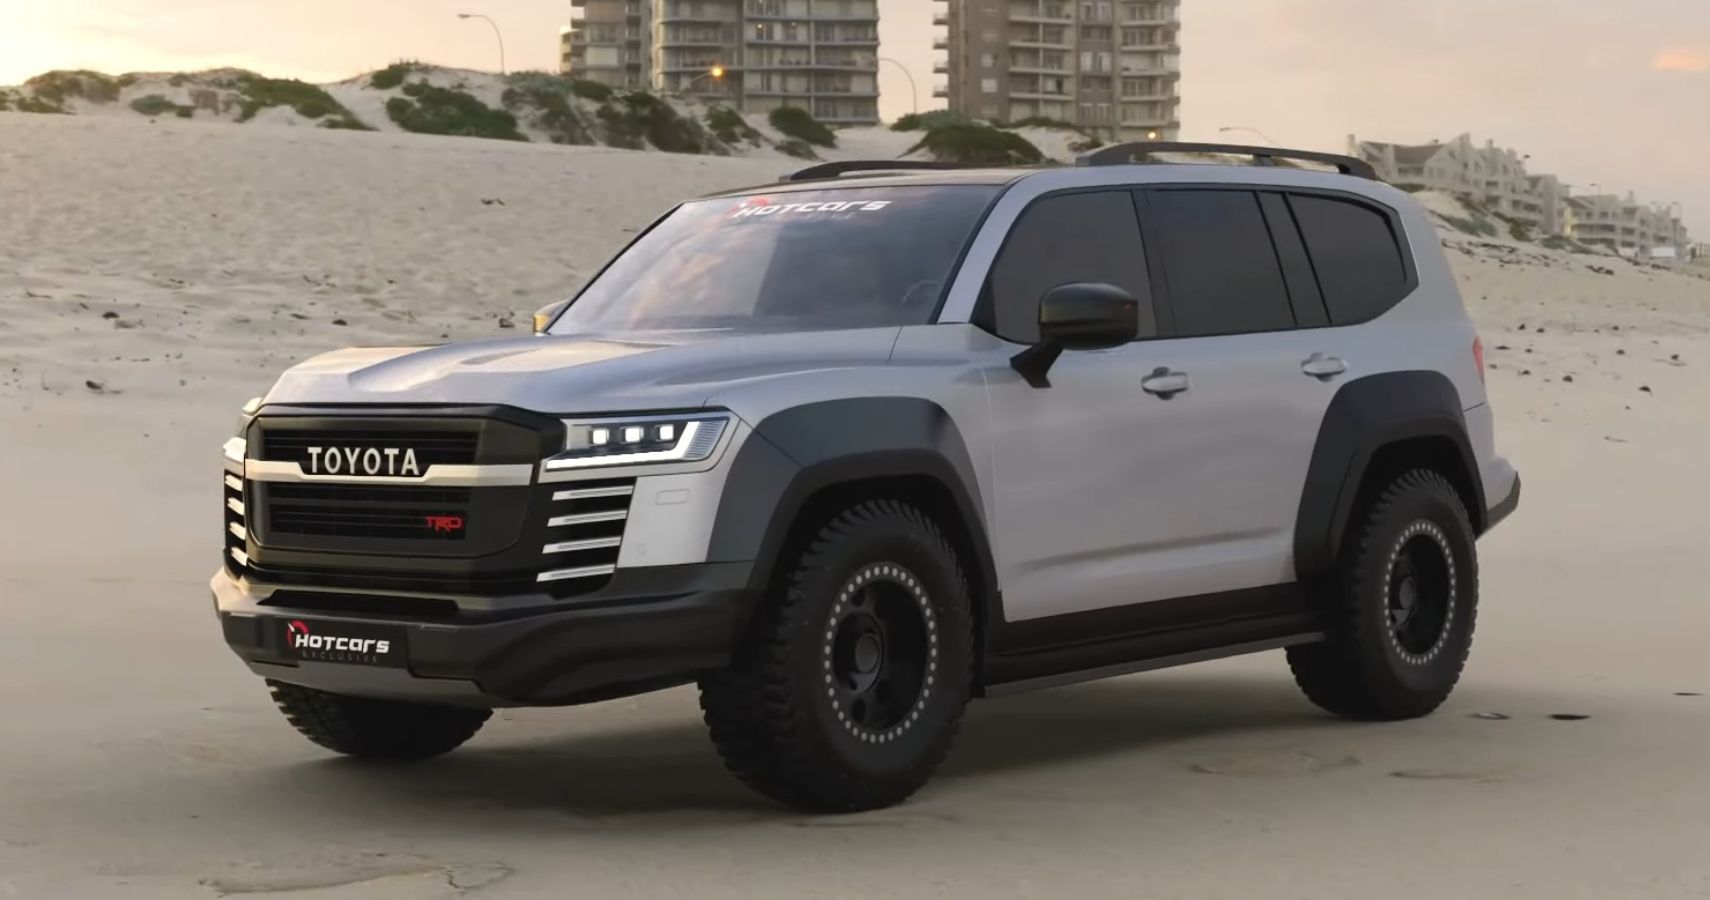 Why Land Rover Should Fear The 2025 Toyota Land Cruiser